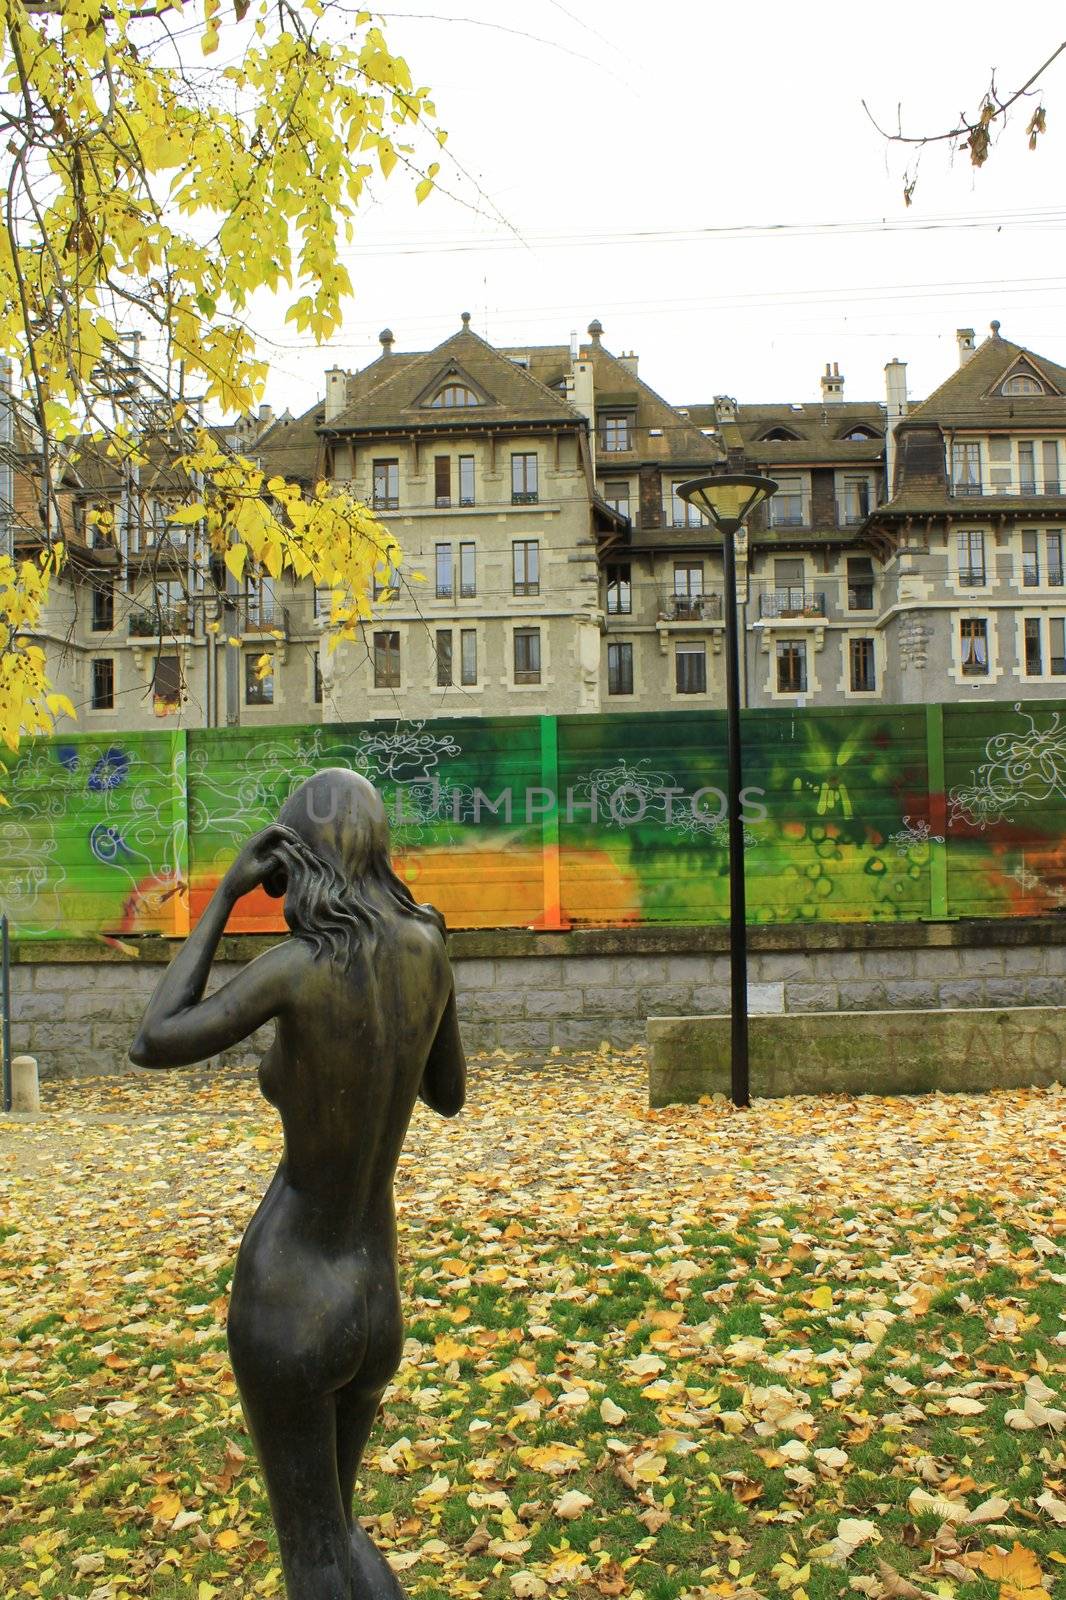 City park with yellow leaves, a statue, graffities and buildings by autumn weather